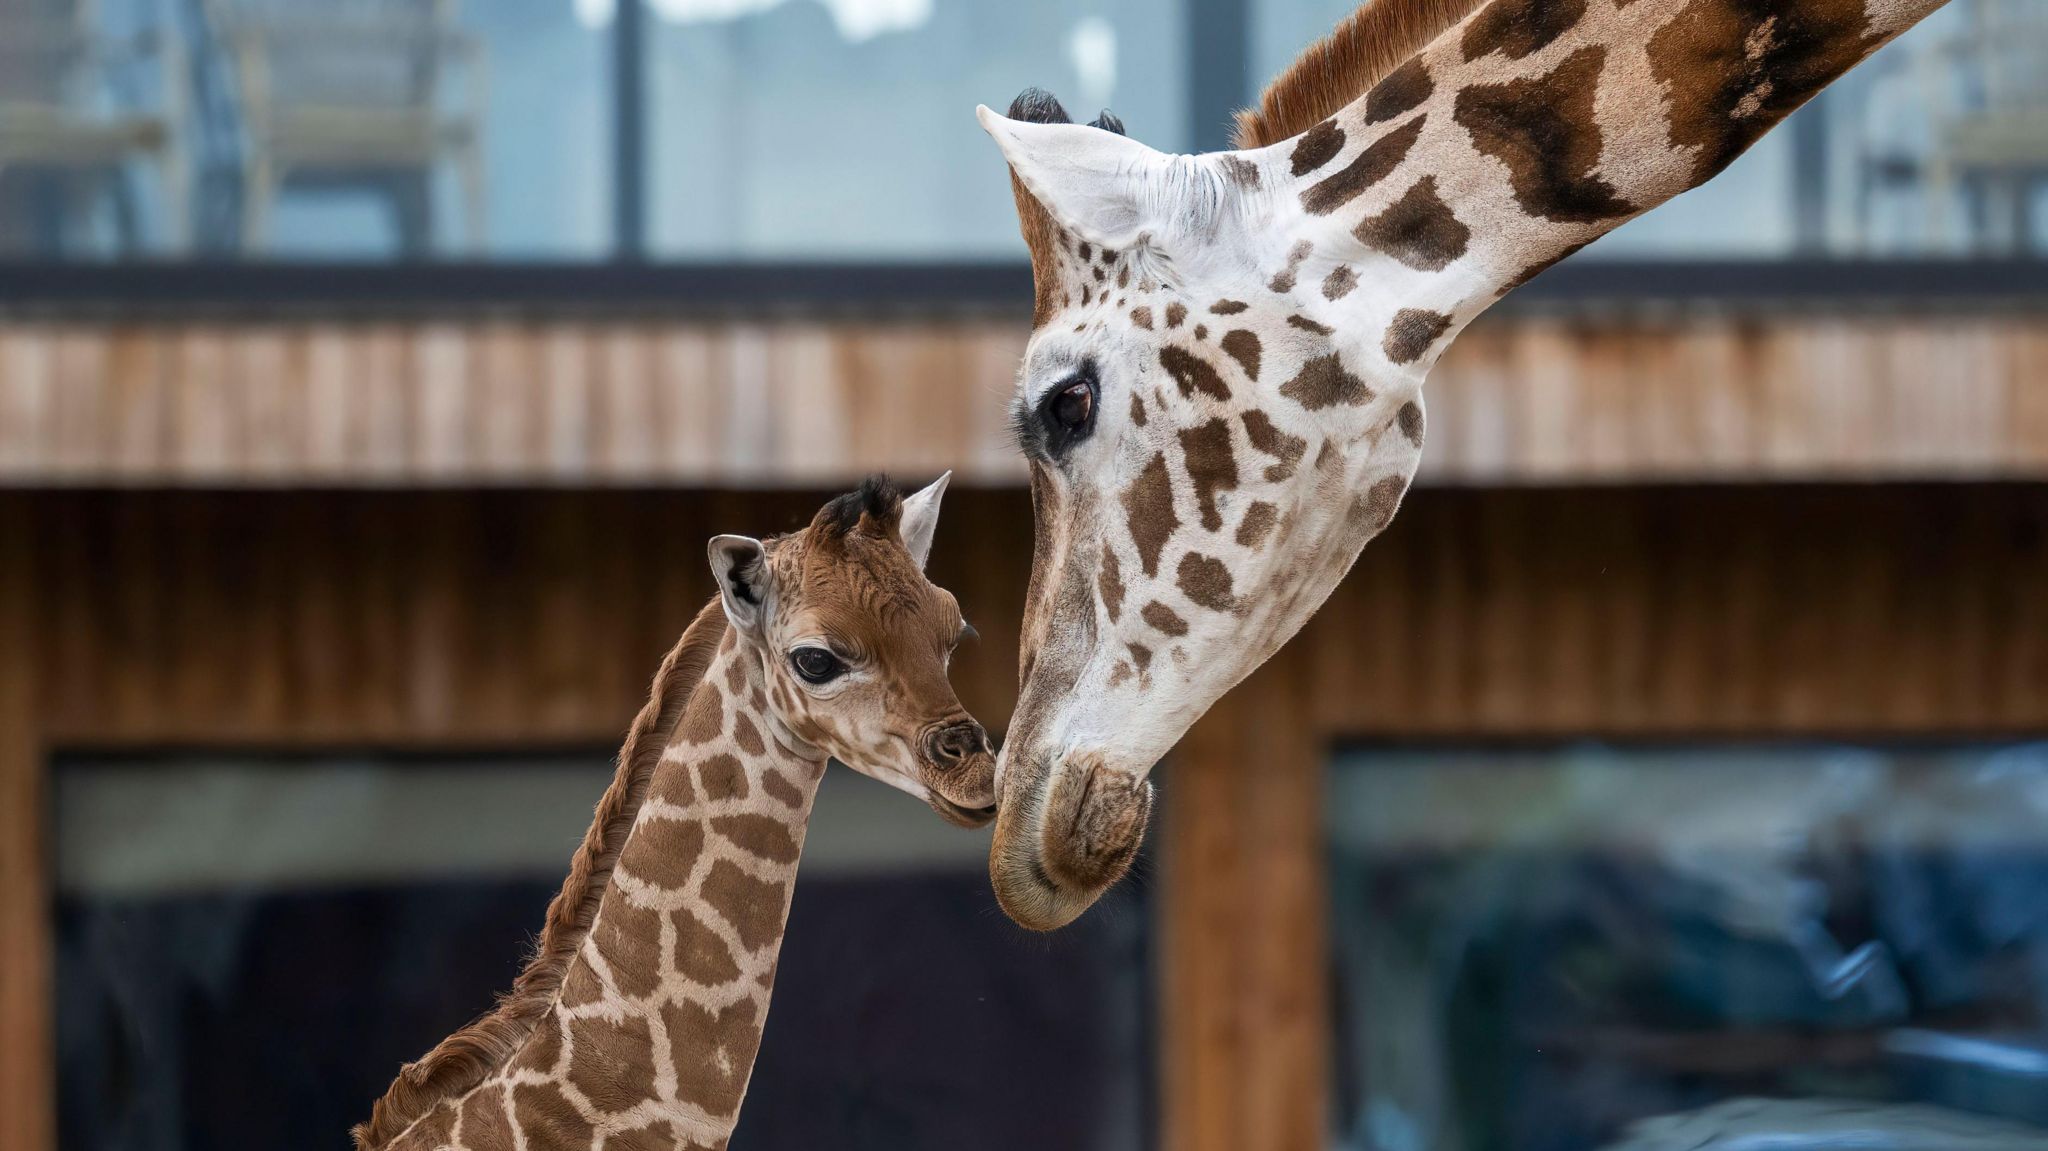 Mum and baby giraffe together in an enclosure